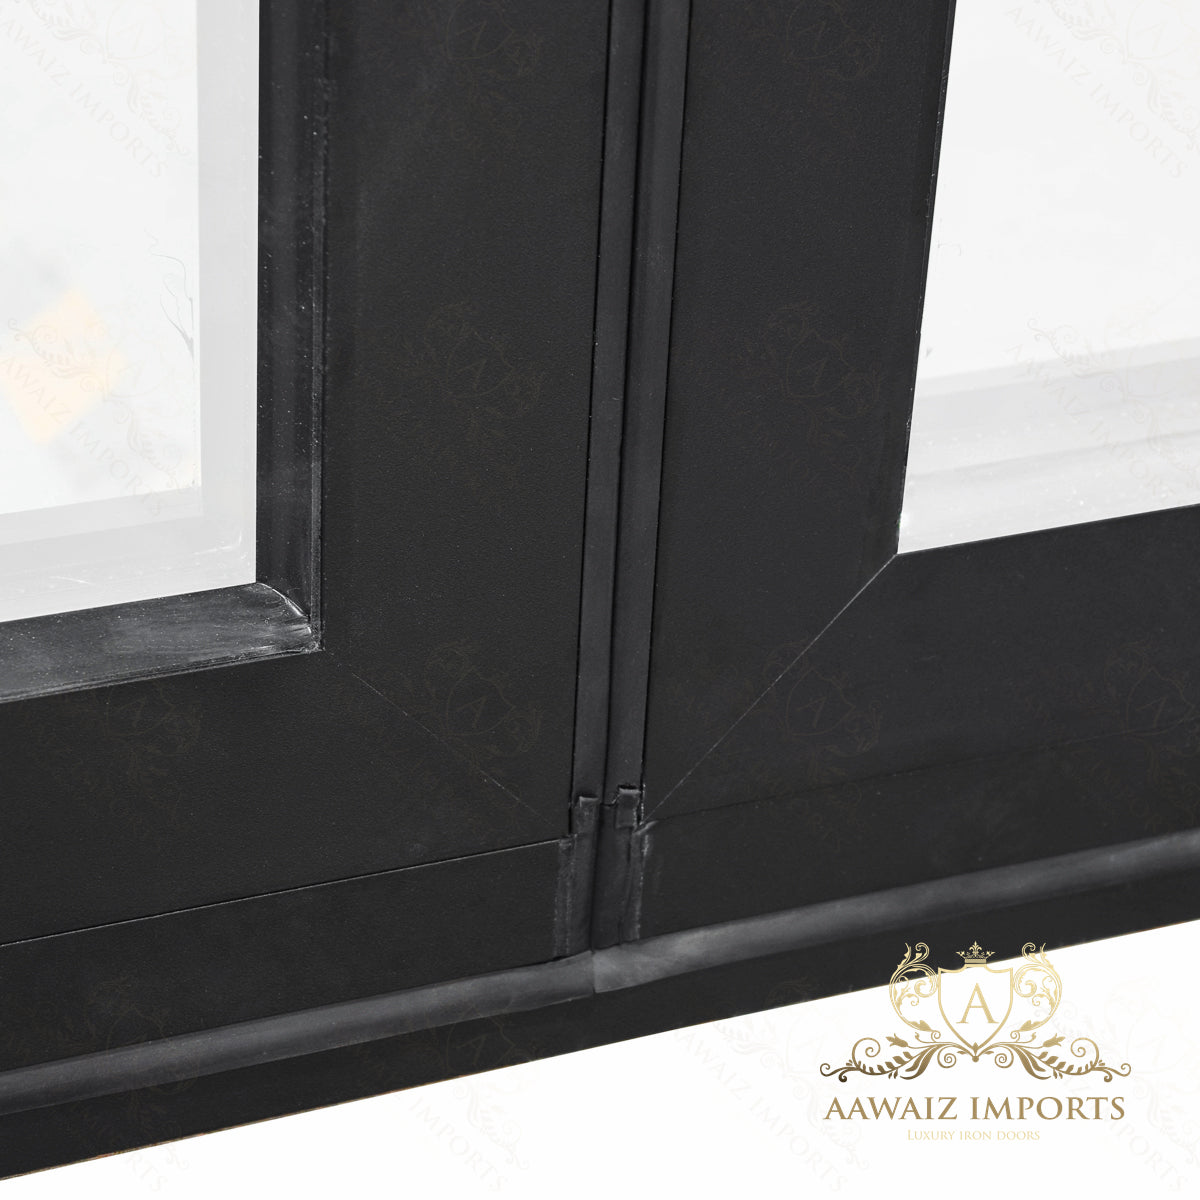 10 Ft Wide By 8 Ft Tall (120" By 96") Aluminum Bi Fold Patio Door  Outswing  Thermal Break Insulated Matt Black Finish